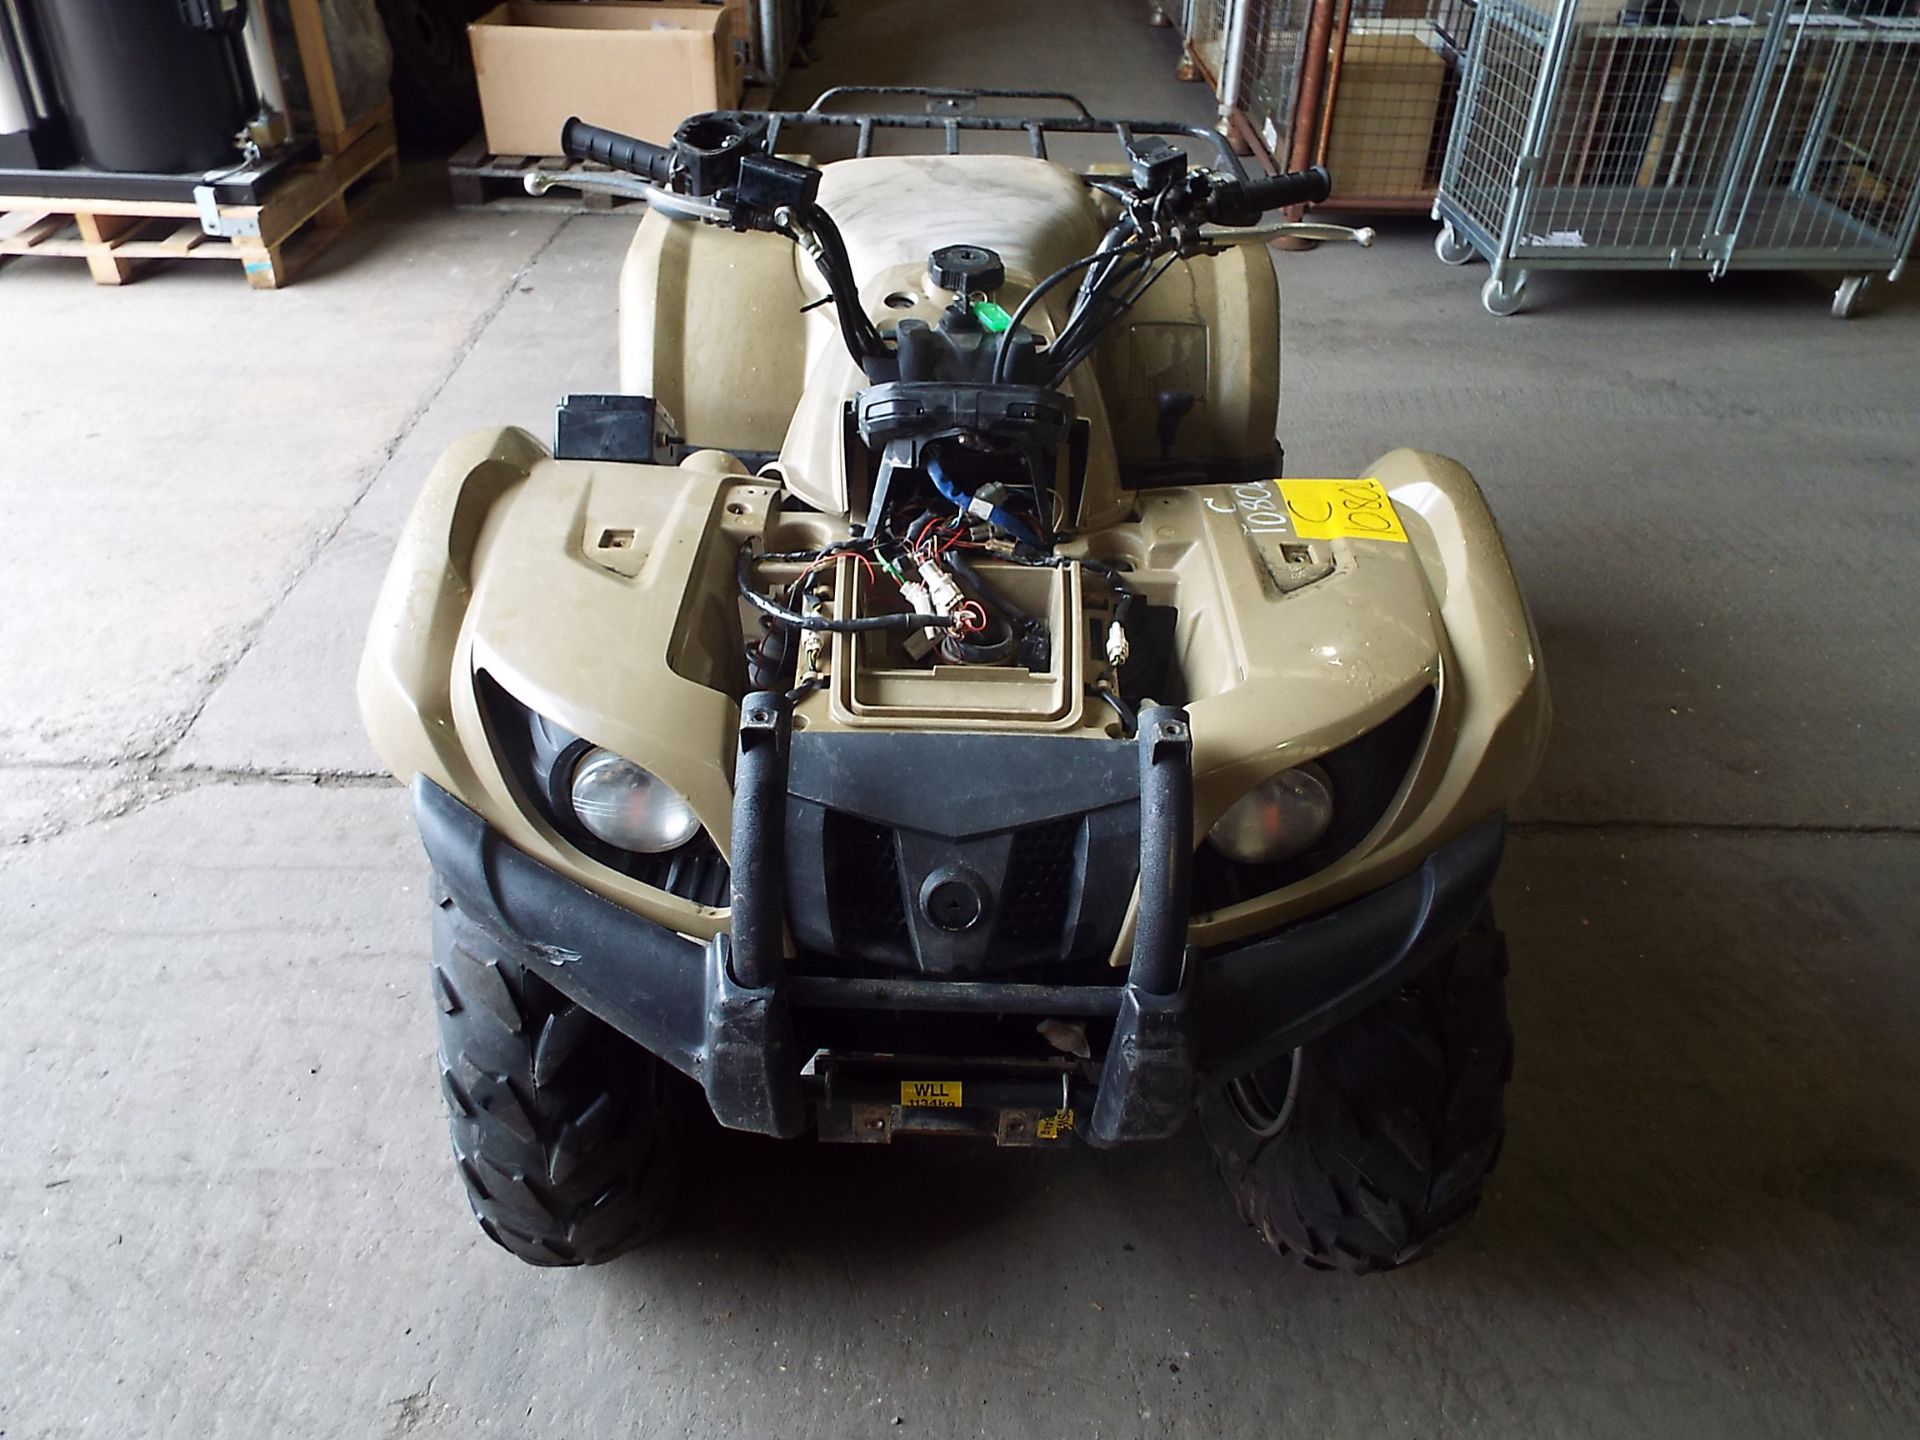 Military Specification Yamaha Grizzly 450 4 x 4 ATV Quad Bike - Image 17 of 19